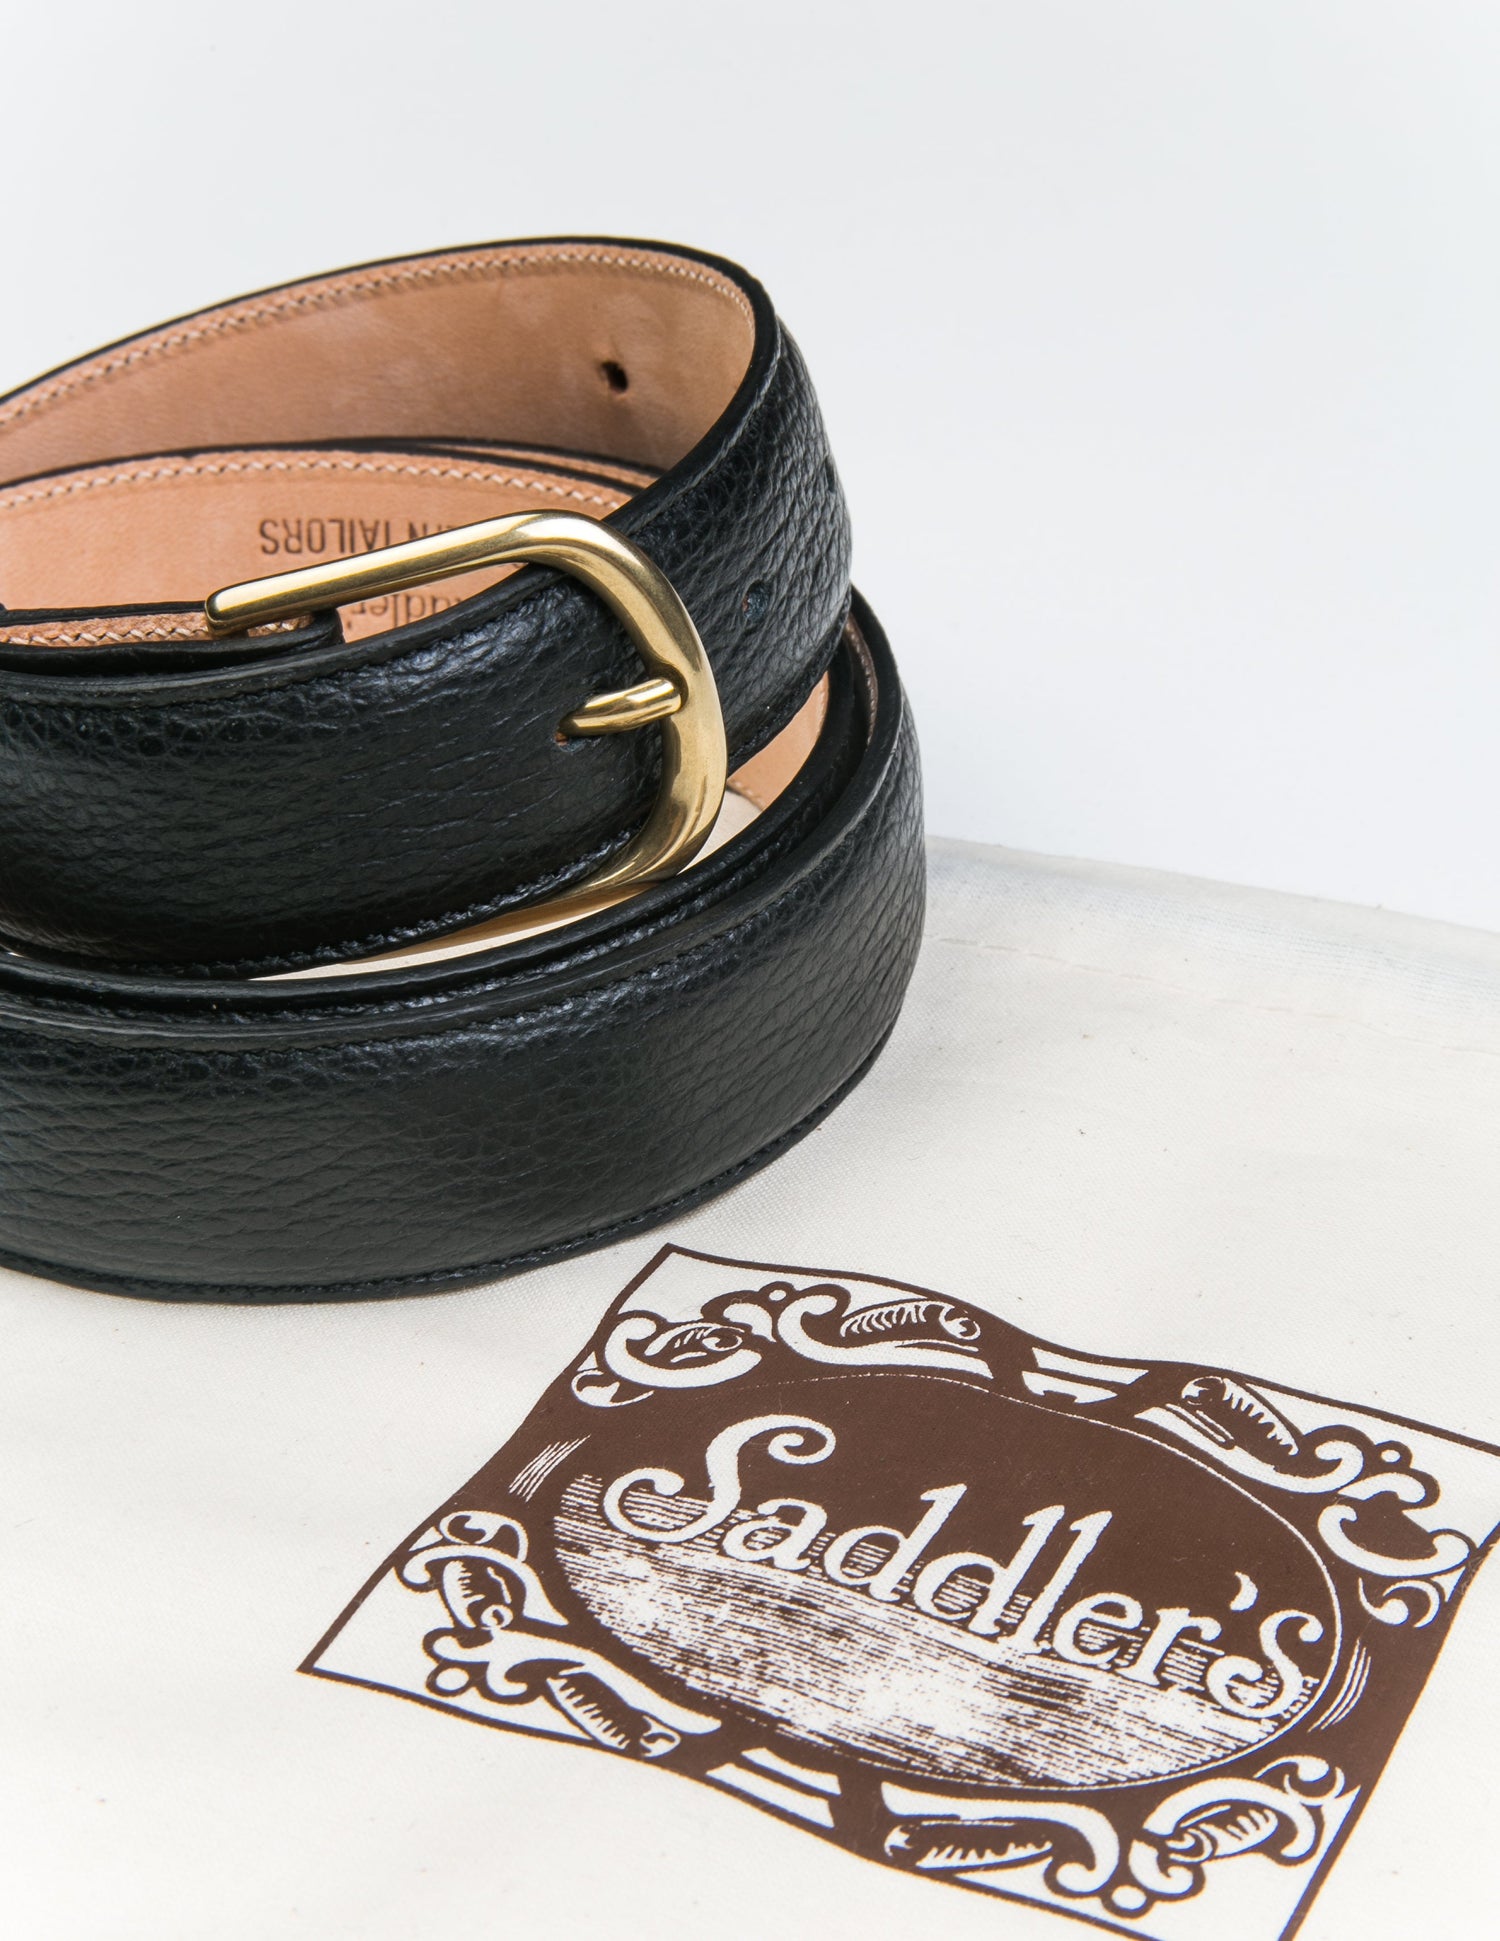 Photo of Brooklyn Tailors x Saddler's 30mm Belt in Grain Leather - Black coiled next to the fabric bag it's sold with. 